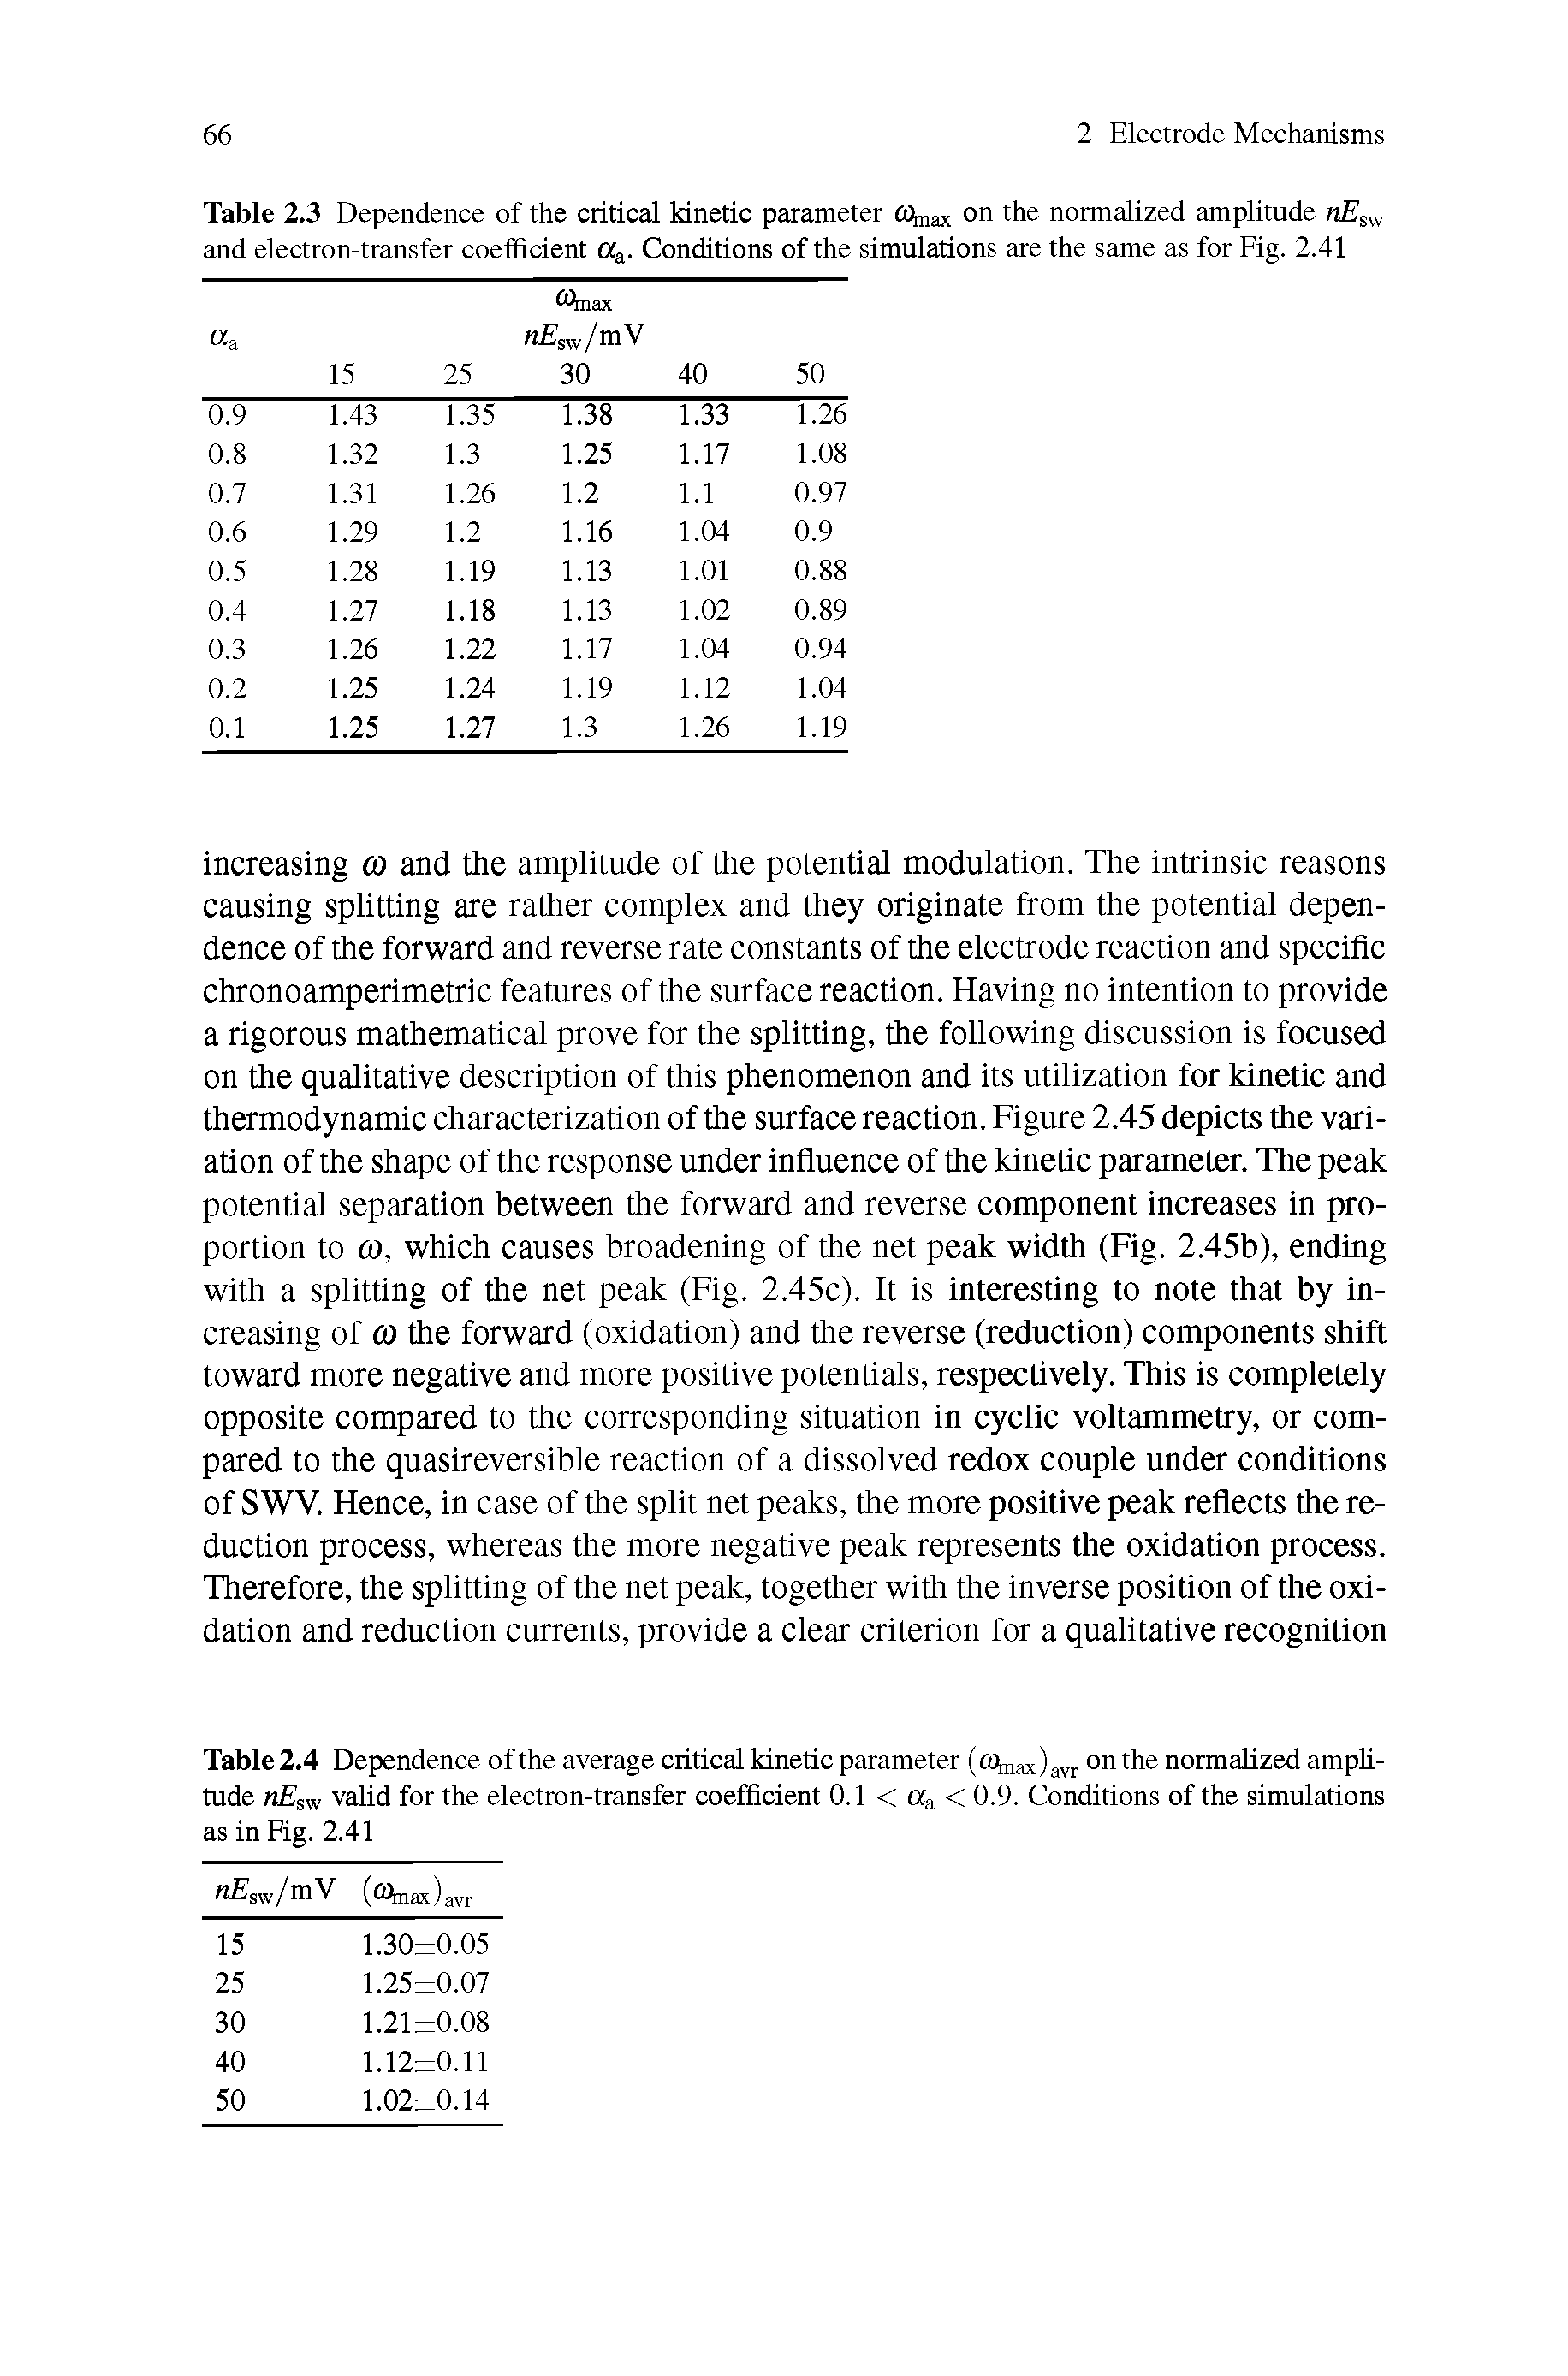 Table 2.3 Dependence of the critical kinetic parameter tOmax on the normalized amplitude nEg and electron-transfer coeflScient Conditions of the simulations are the same as for Fig. 2.41...